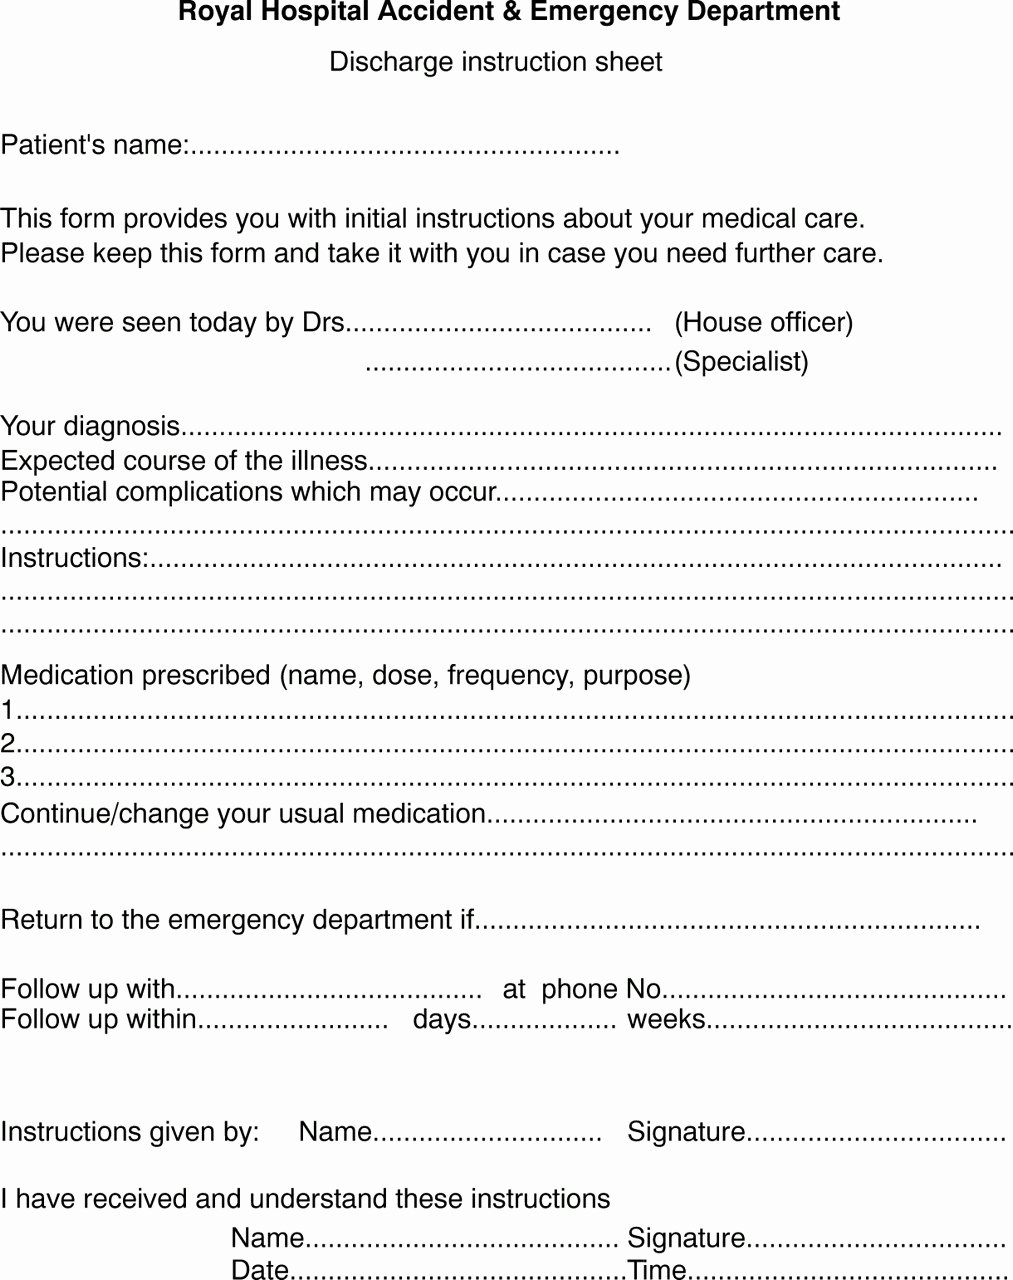 Hospital Discharge Papers Template Beautiful Discharge Instructions for Emergency Department Patients